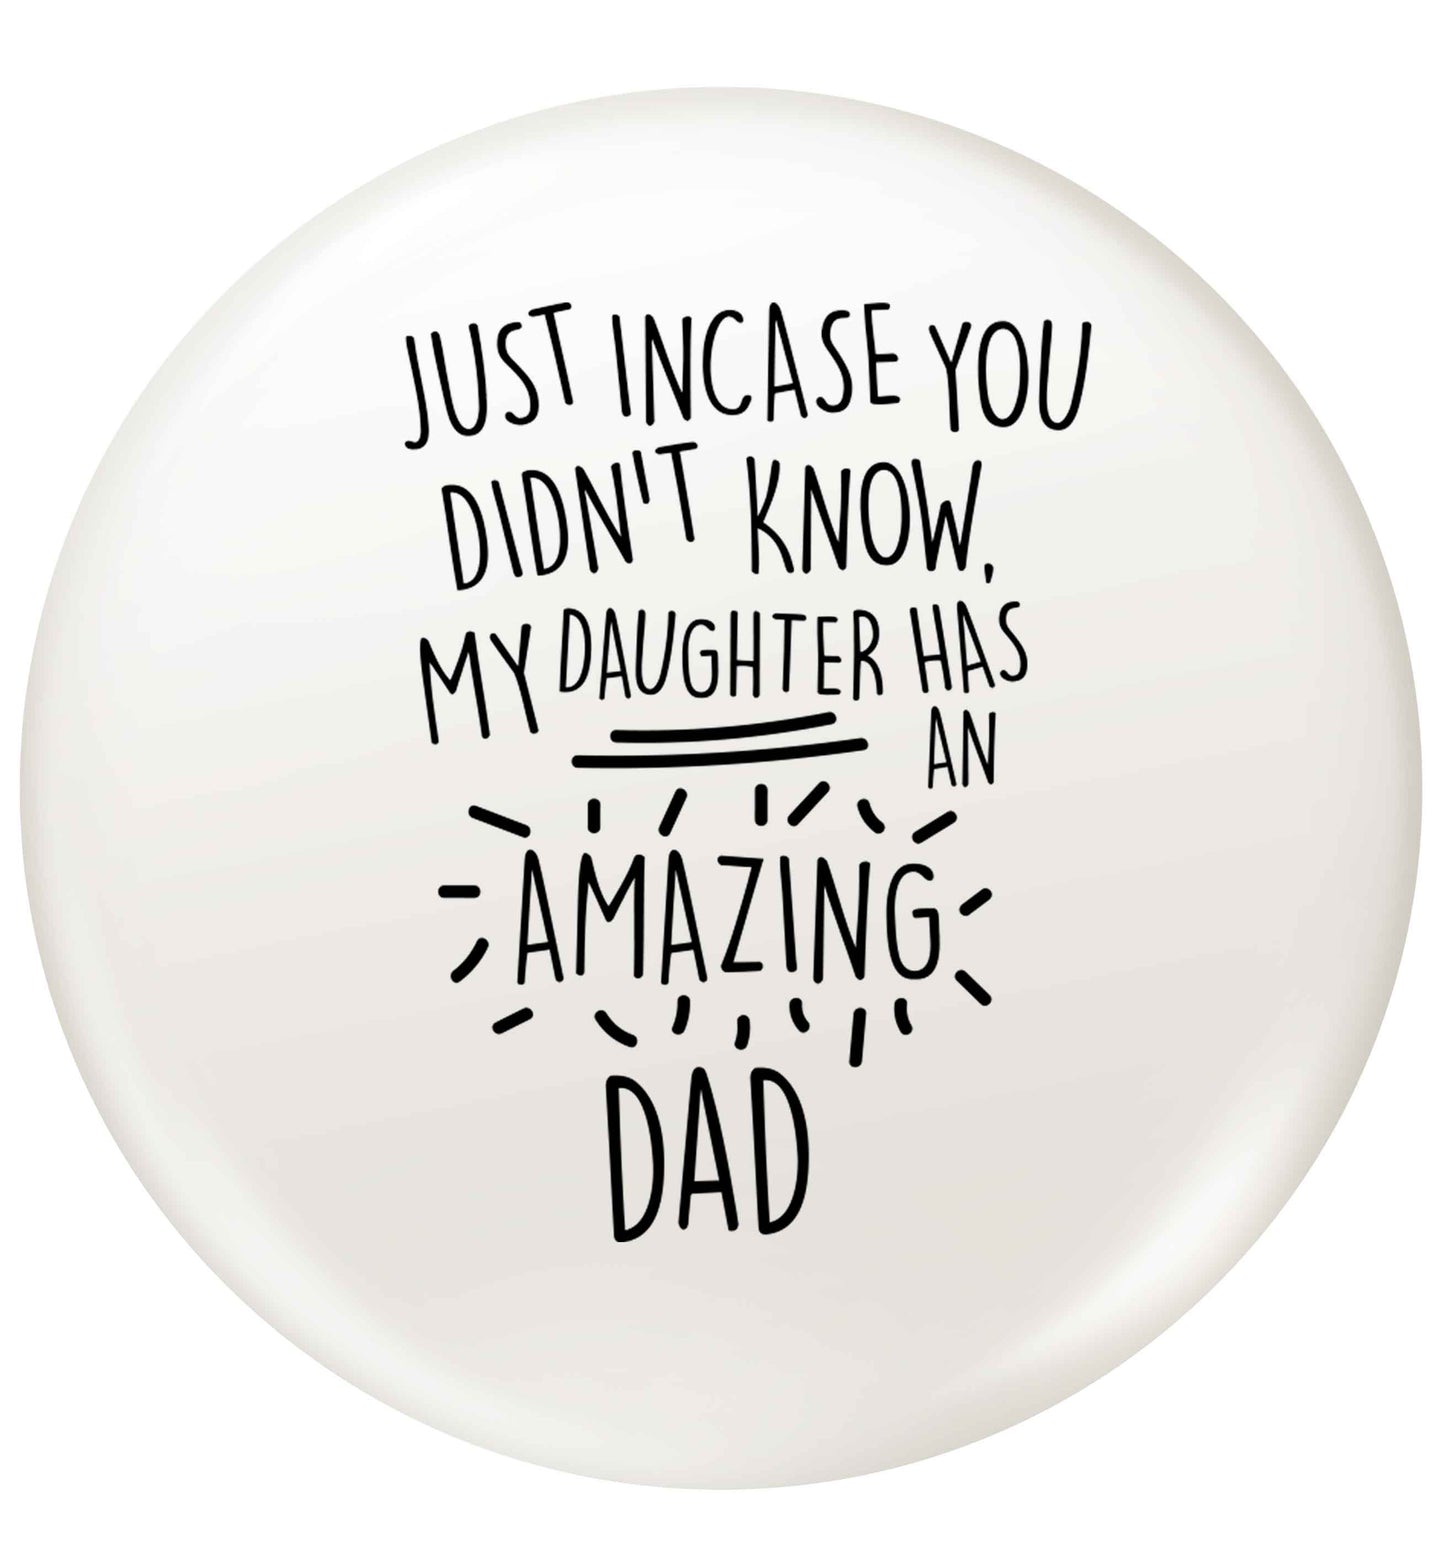 Just incase you didn't know my daughter has an amazing dad small 25mm Pin badge